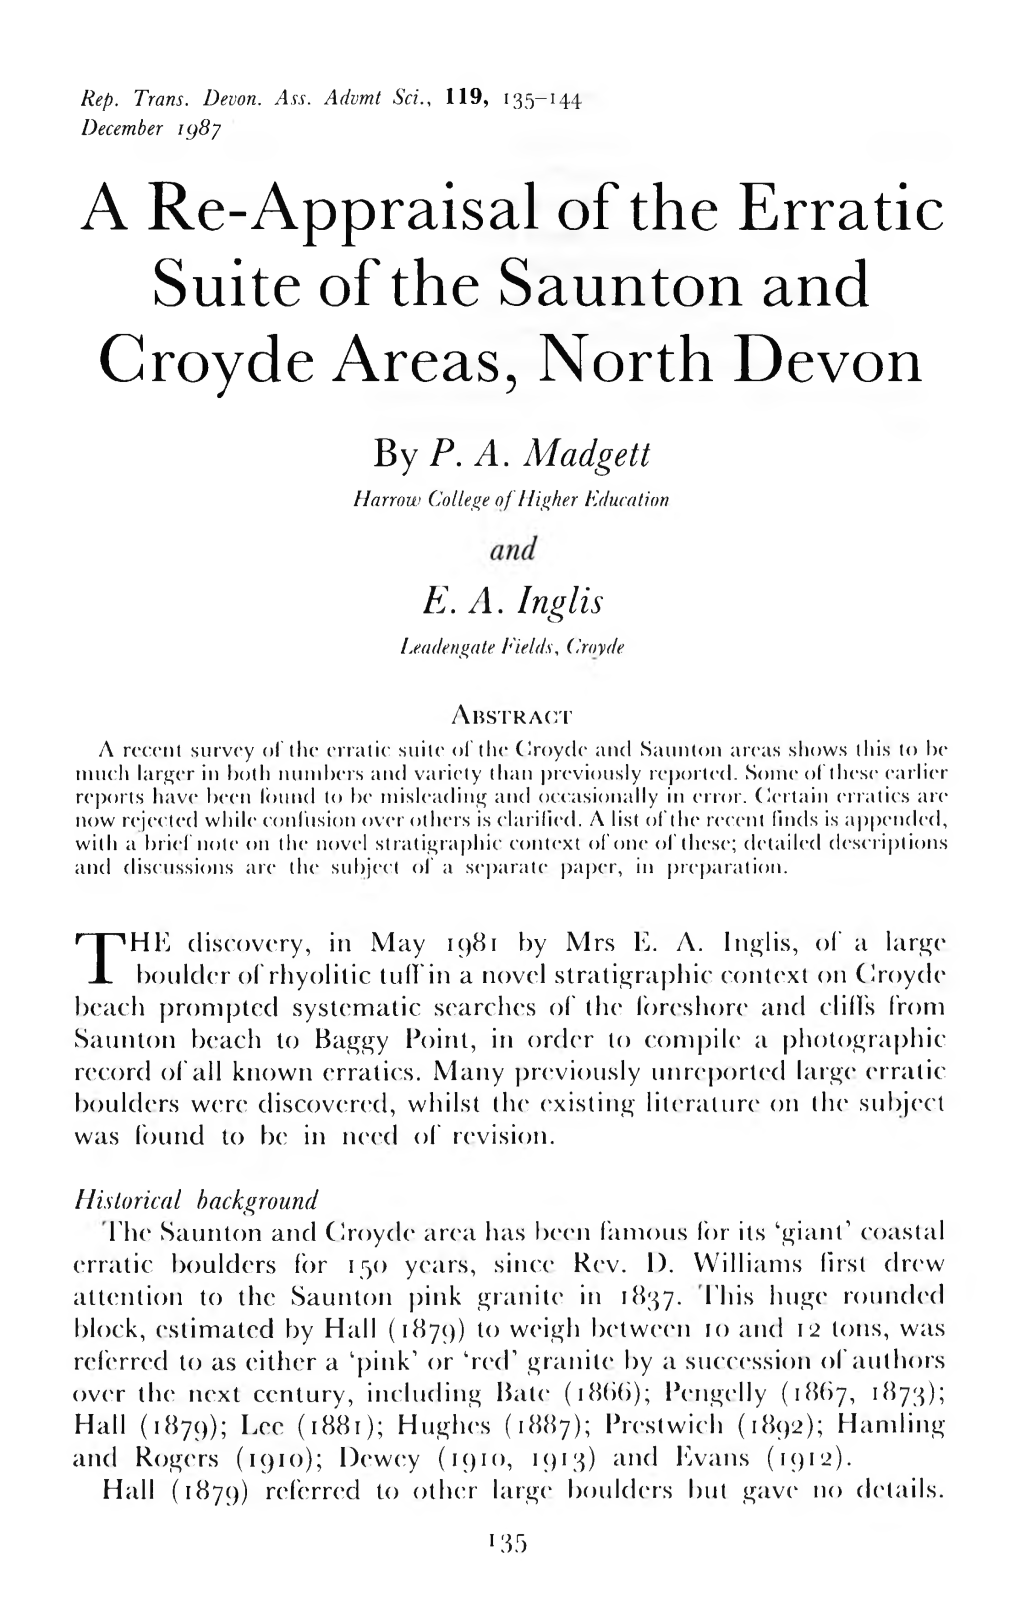 A Re-Appraisal of the Erratic Suite of the Saunton and Croyde Areas, North Devon